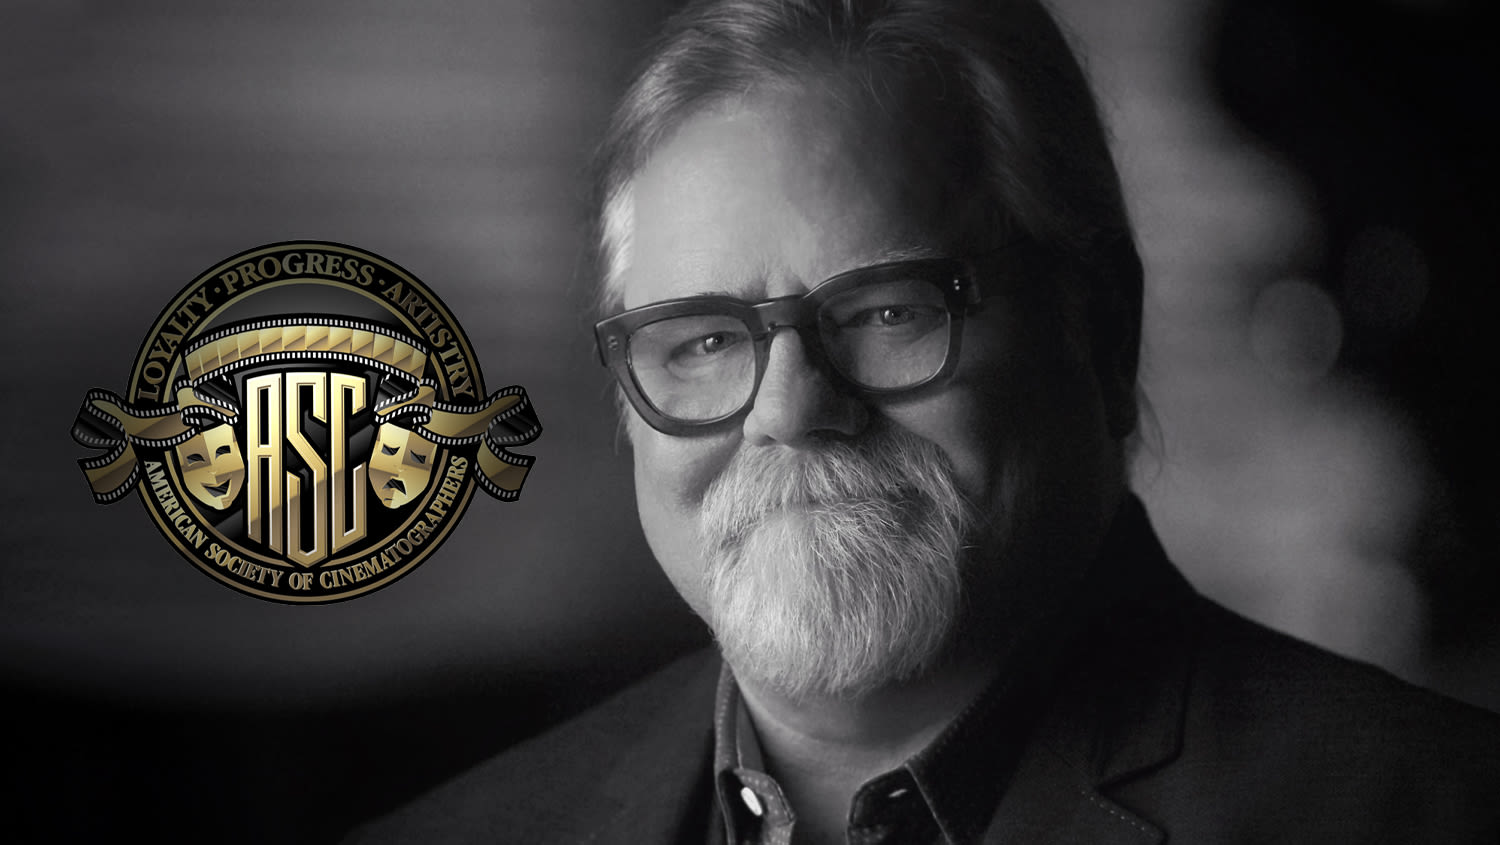 American Society Of Cinematographers Re-Elects Shelly Johnson As President, Sets Other Officers